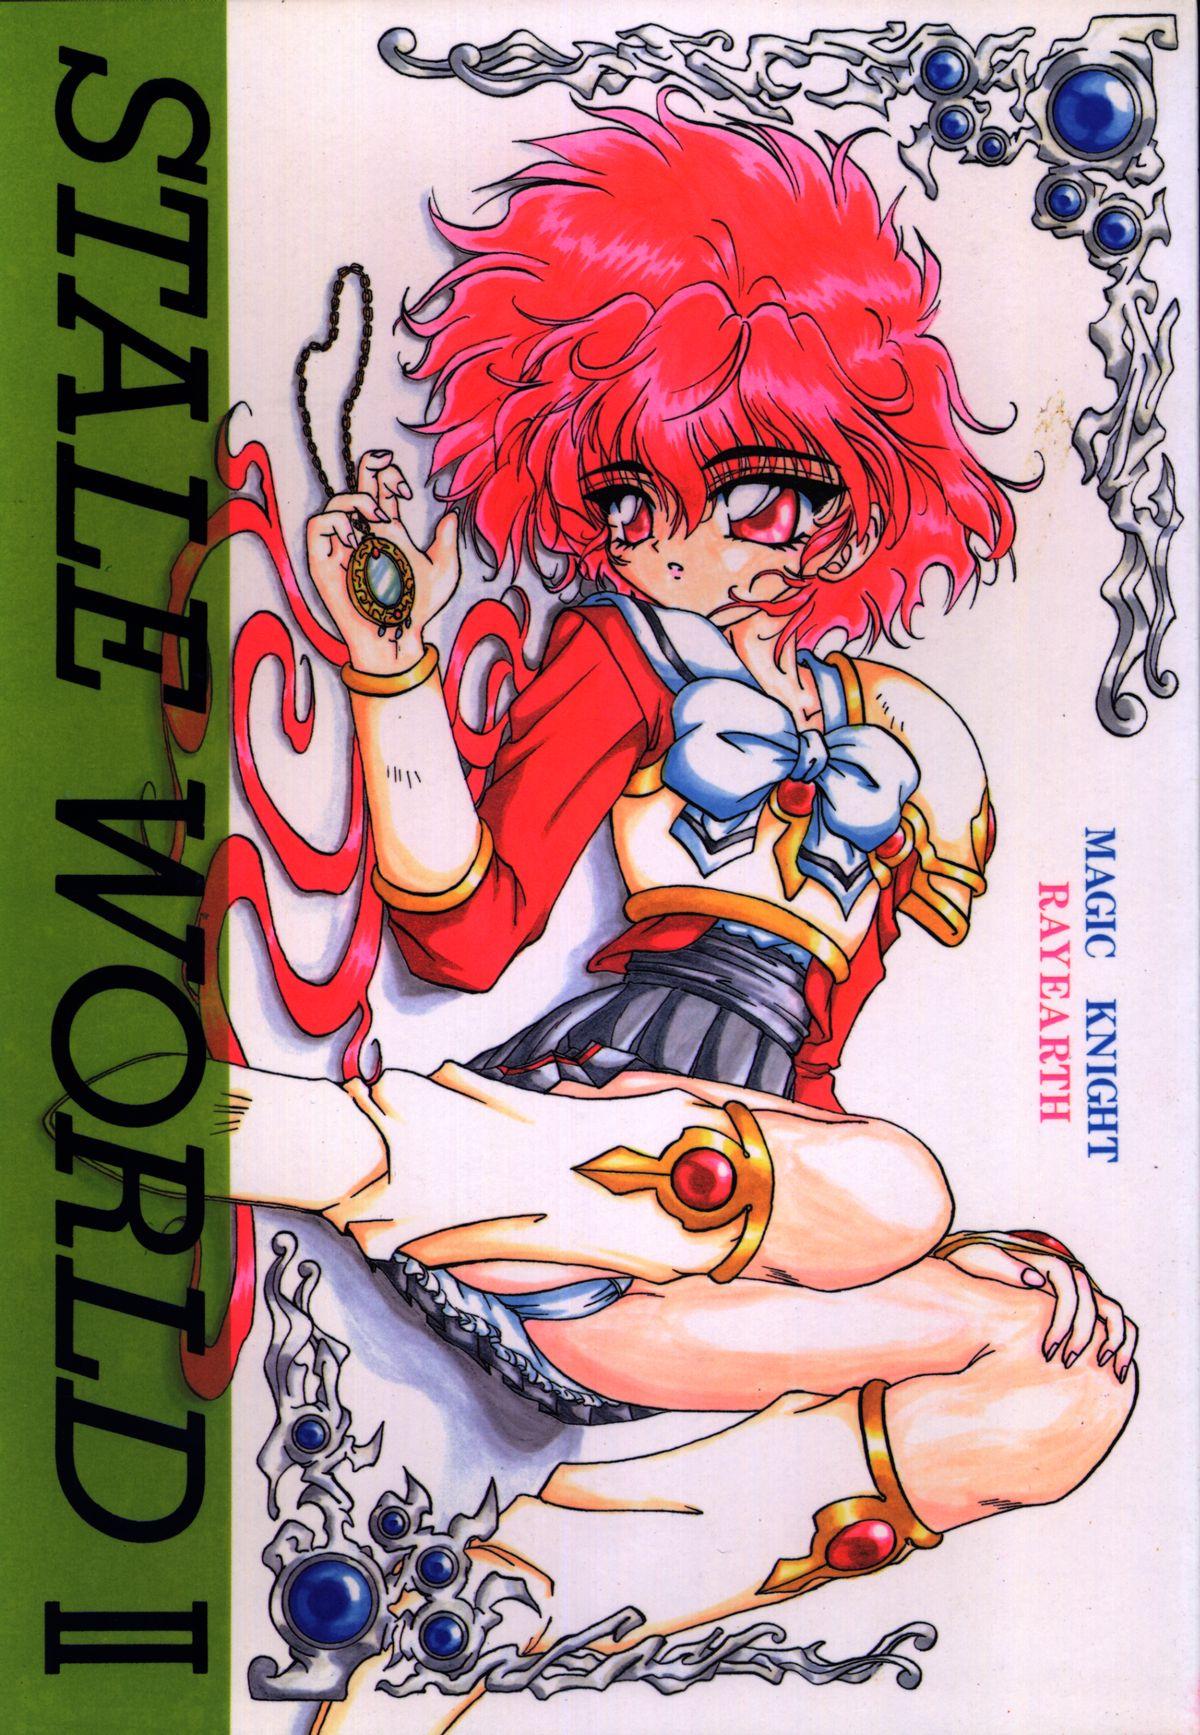 Freaky Stale World II - Magic knight rayearth Friends - Page 1